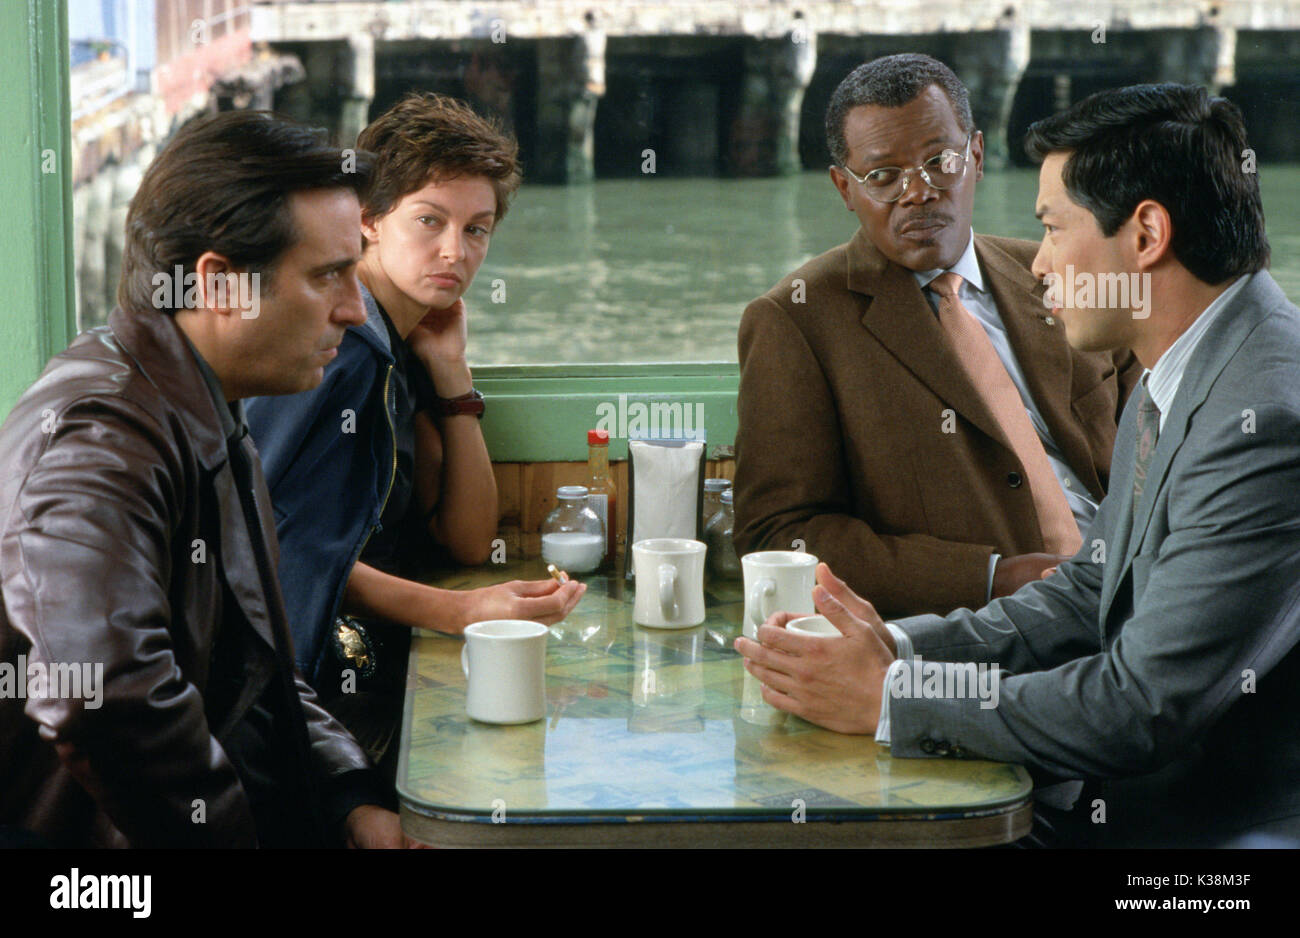 TWISTED ANDY GARCIA, ASHLEY JUDD, SAMUEL L JACKSON, RUSSELL WONG     Date: 2004 Stock Photo